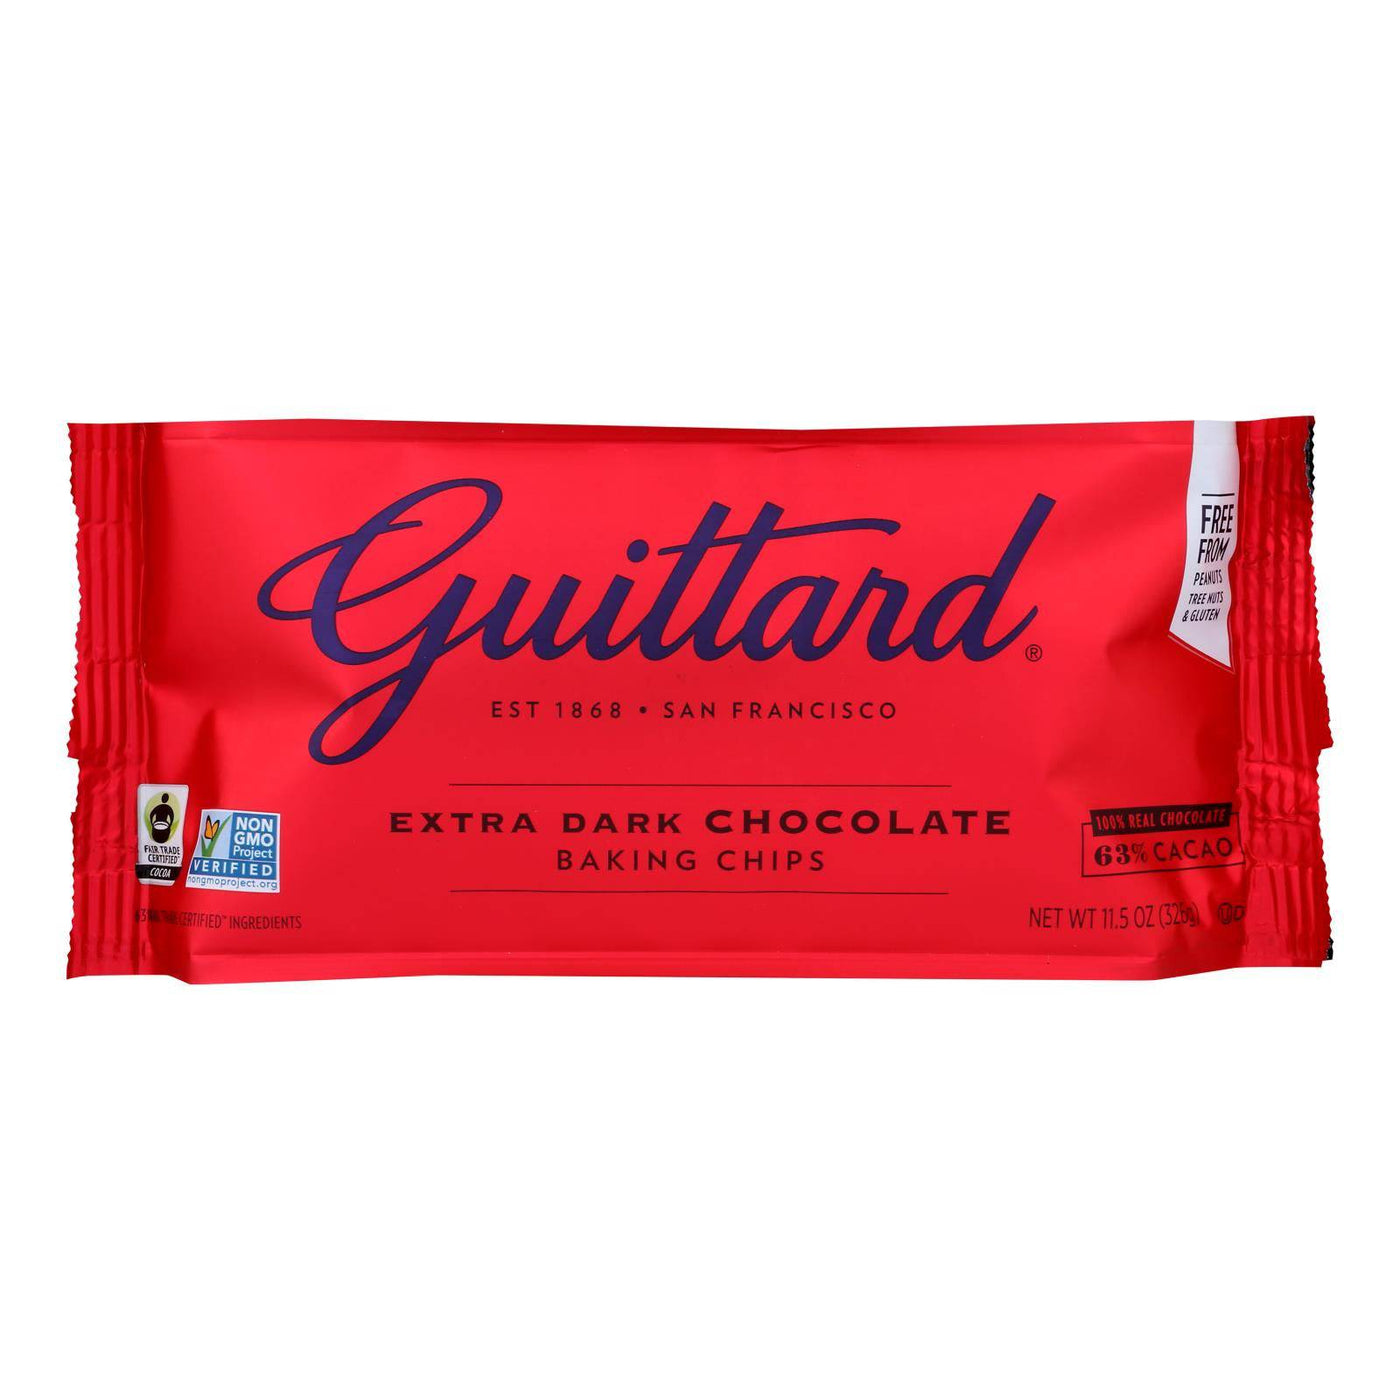 Buy Guittard Chocolate Extra Dark - Chocolate Chip - Case Of 12 - 11.5 Oz.  at OnlyNaturals.us